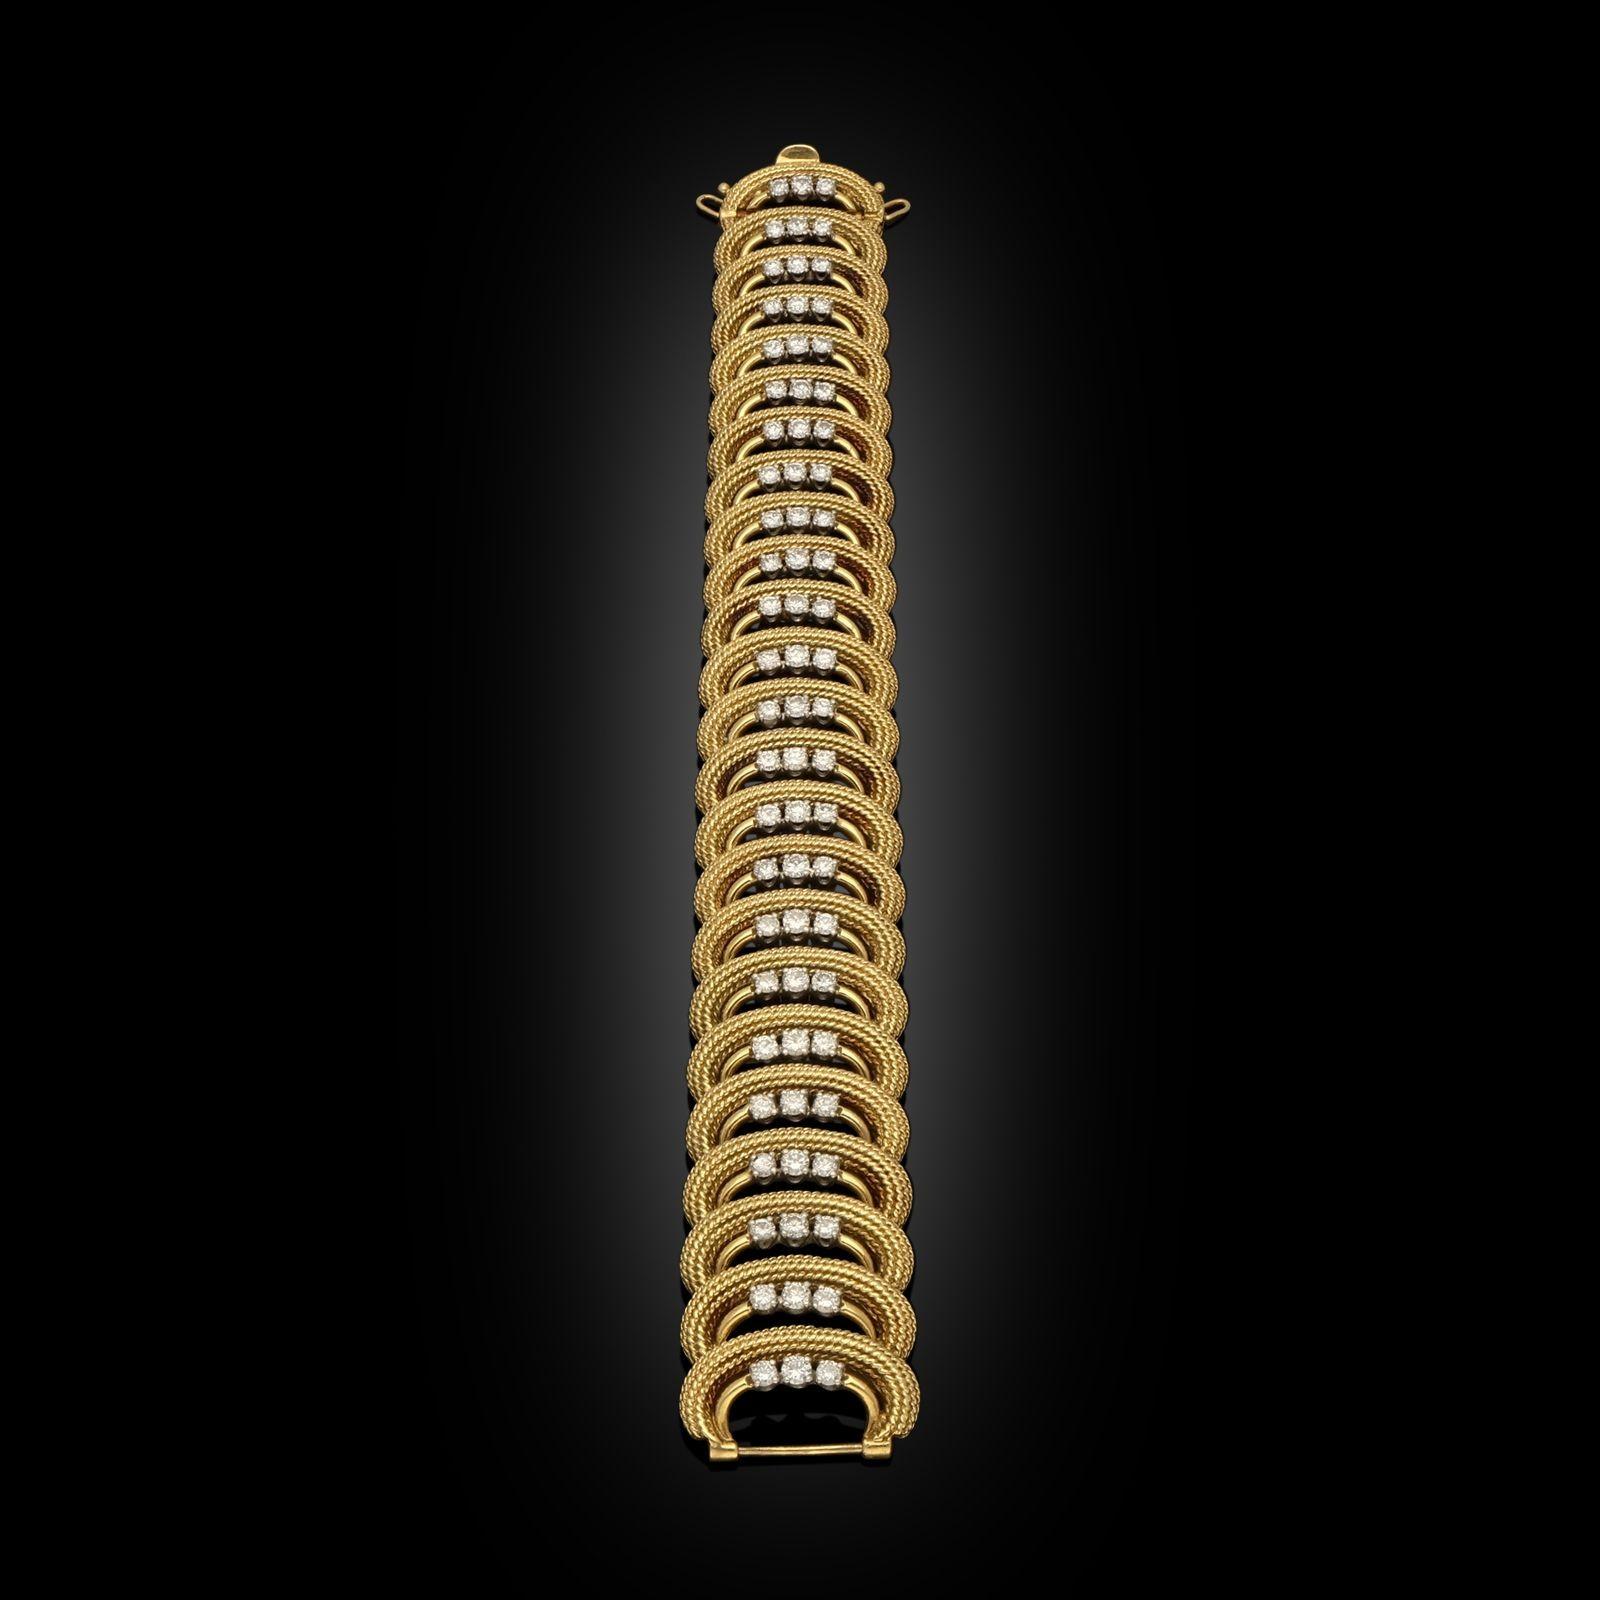 A beautiful 18ct gold and diamond bracelet by Cartier c.1950s, the wide straight bracelet formed of twenty-four C shape motifs in 18ct yellow gold with rope twist detailing, each with a round gold wire following the inside curve which is set with